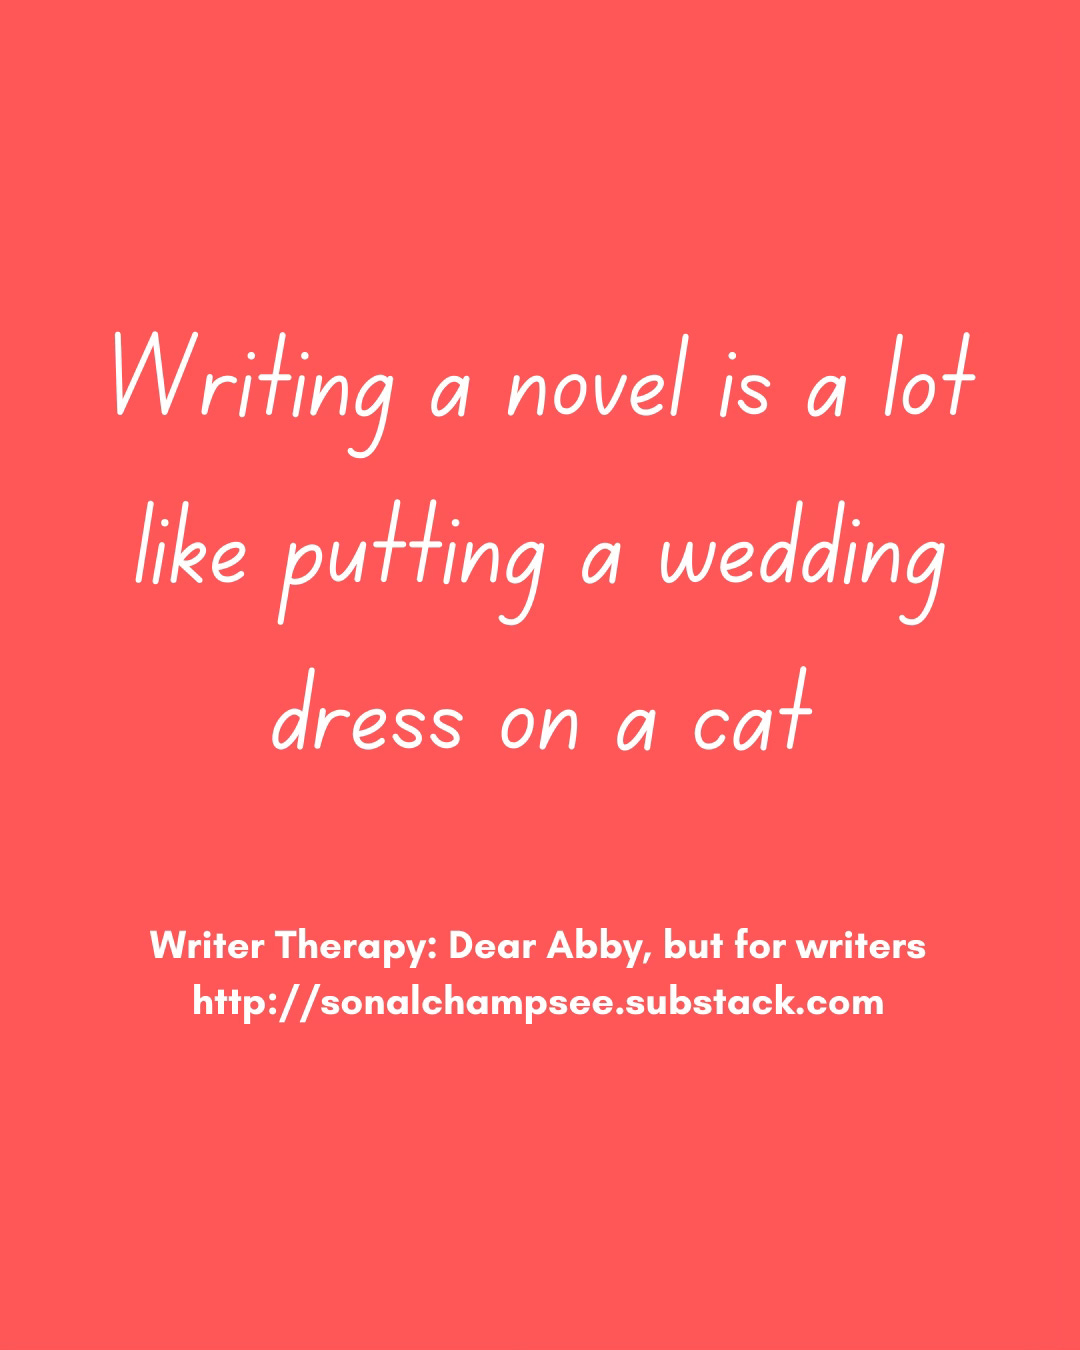 Writing a novel is a lot like putting a wedding dress on a cat. Writer Therapy: like Dear Abby for writers